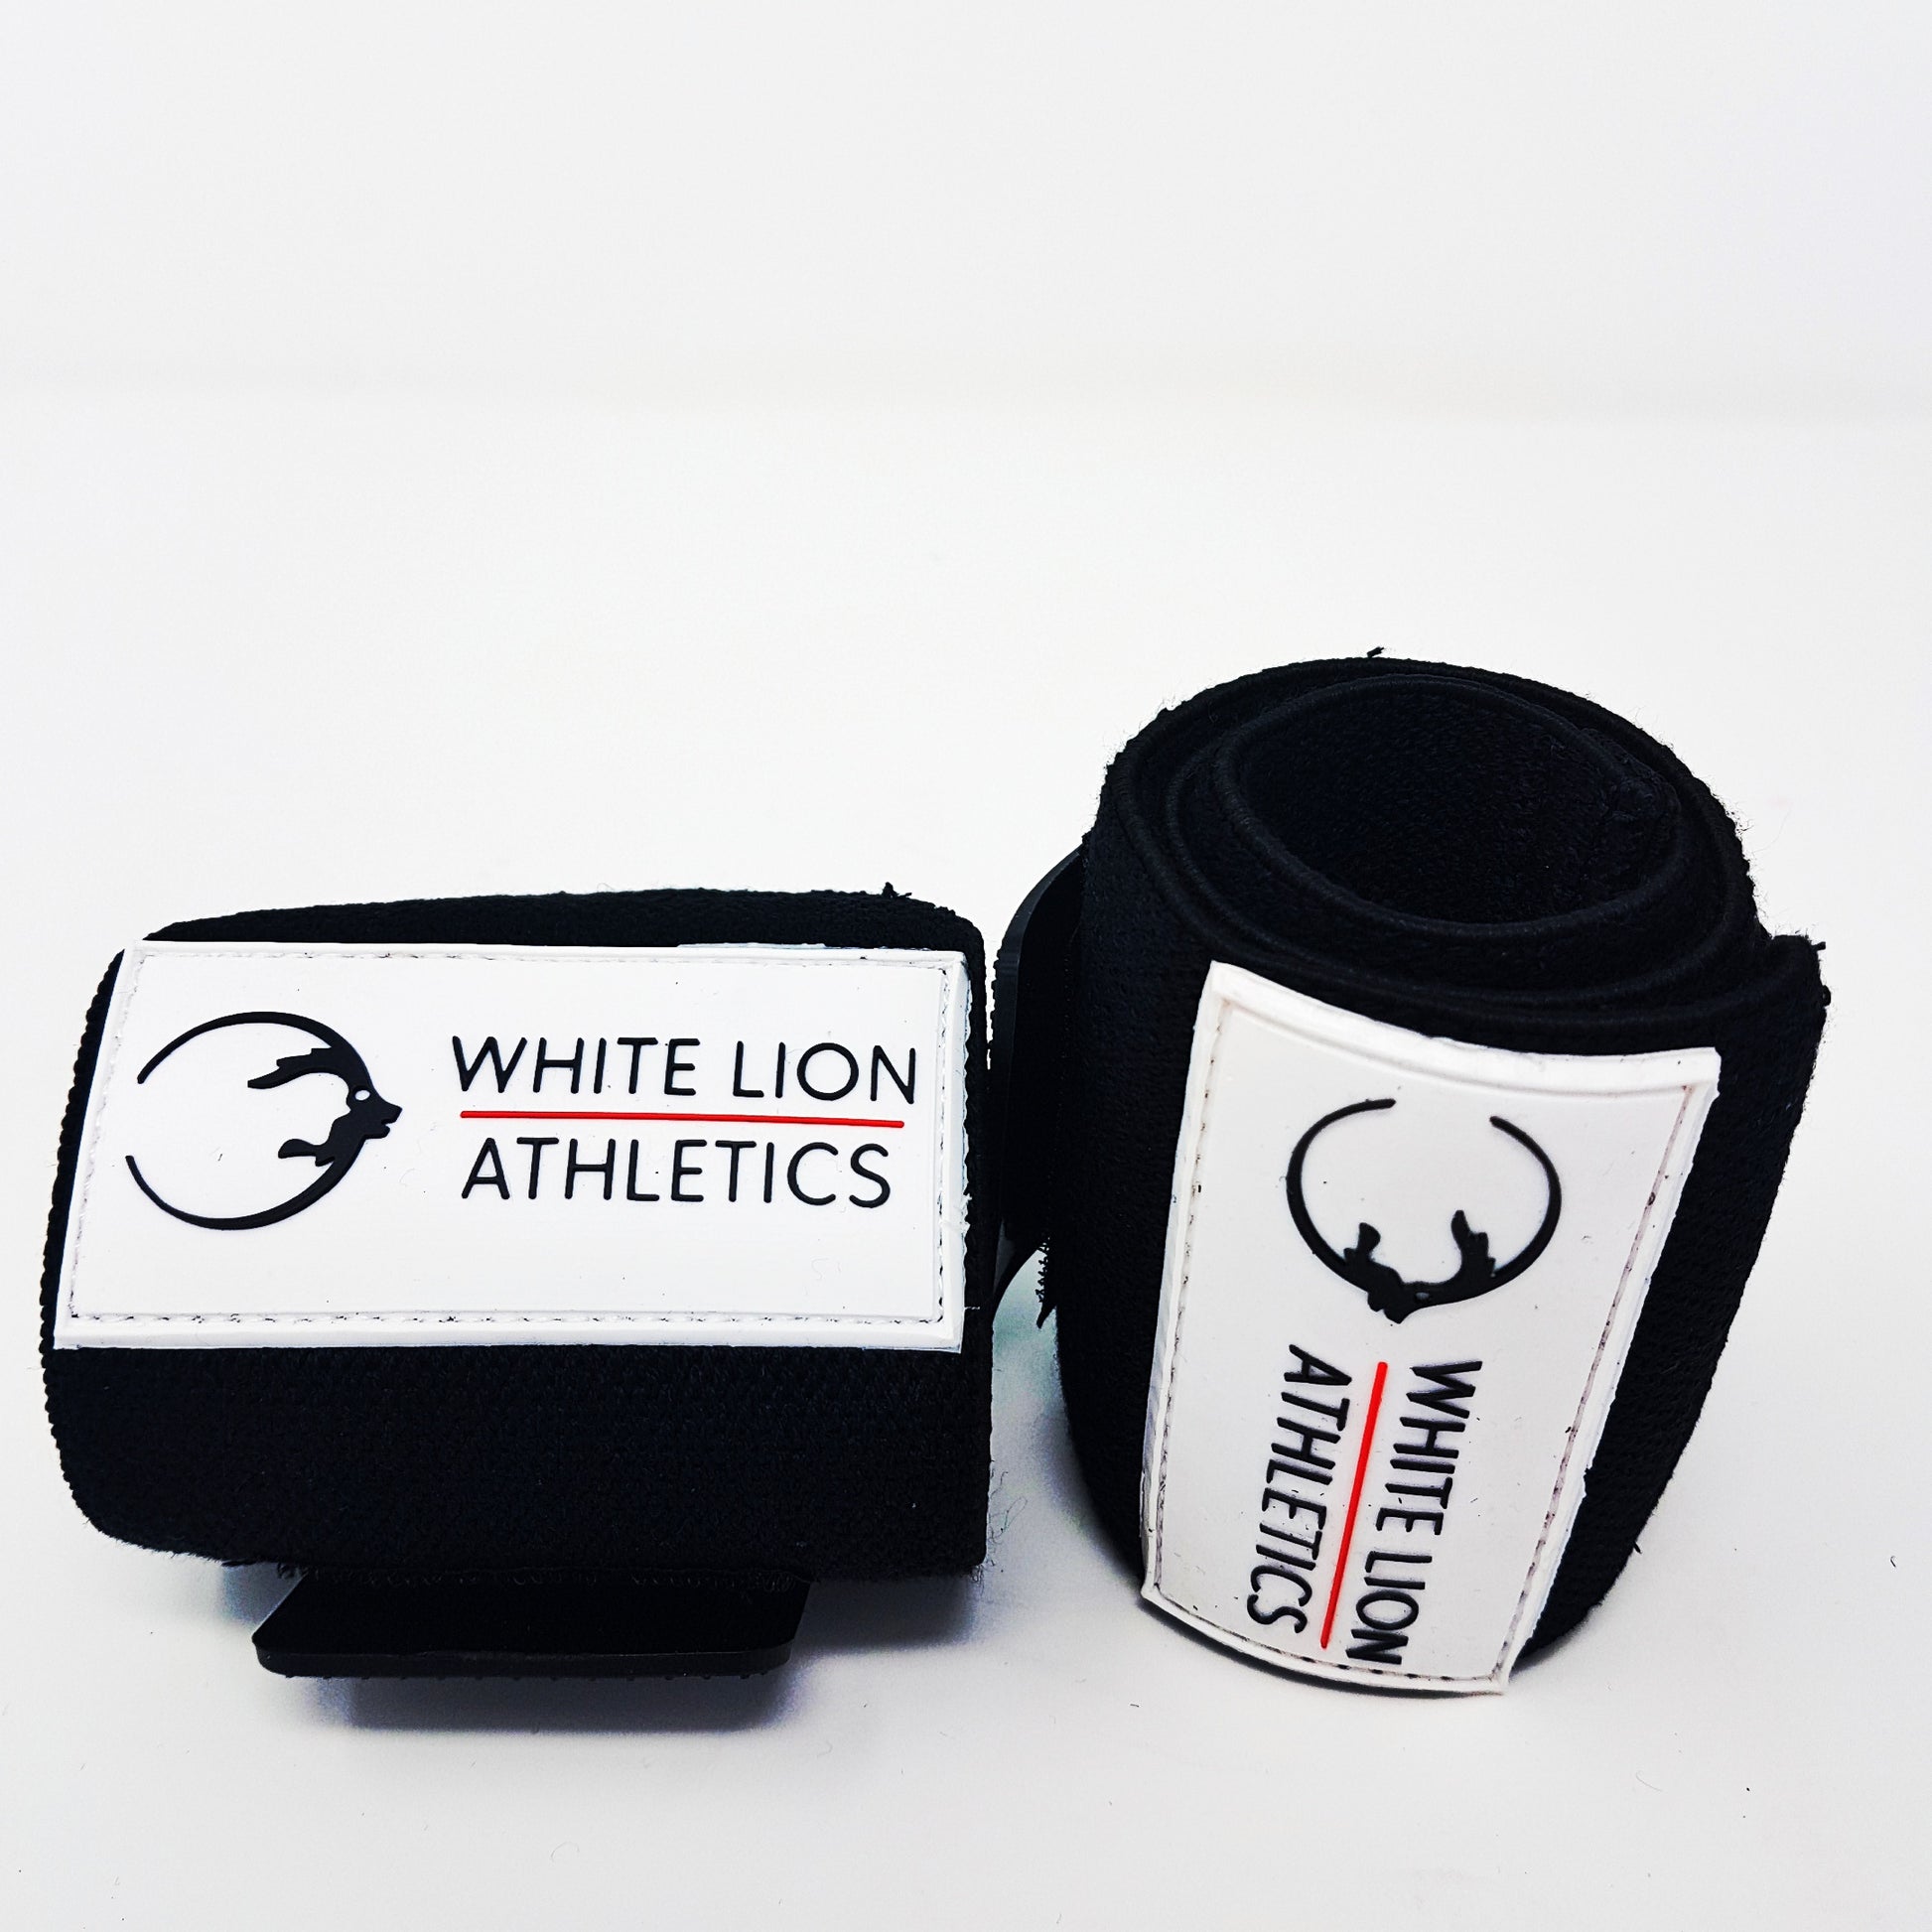 Wrist Wraps| BLACK| Wrist Support for Weightlifting & Crossfit - White Lion Athletics